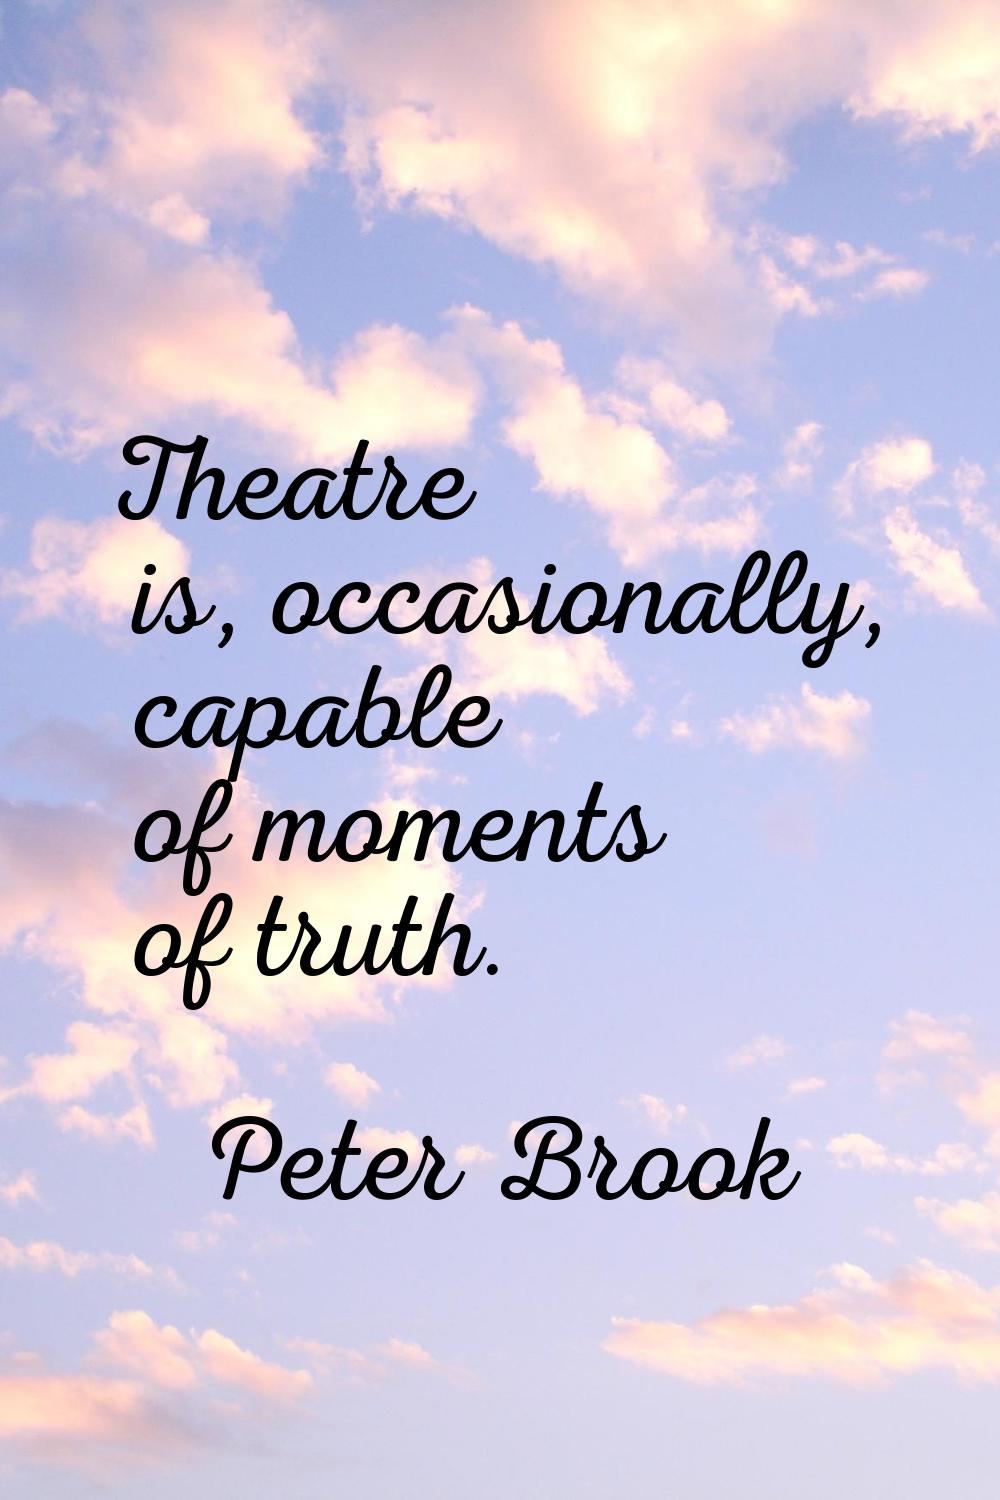 Theatre is, occasionally, capable of moments of truth.